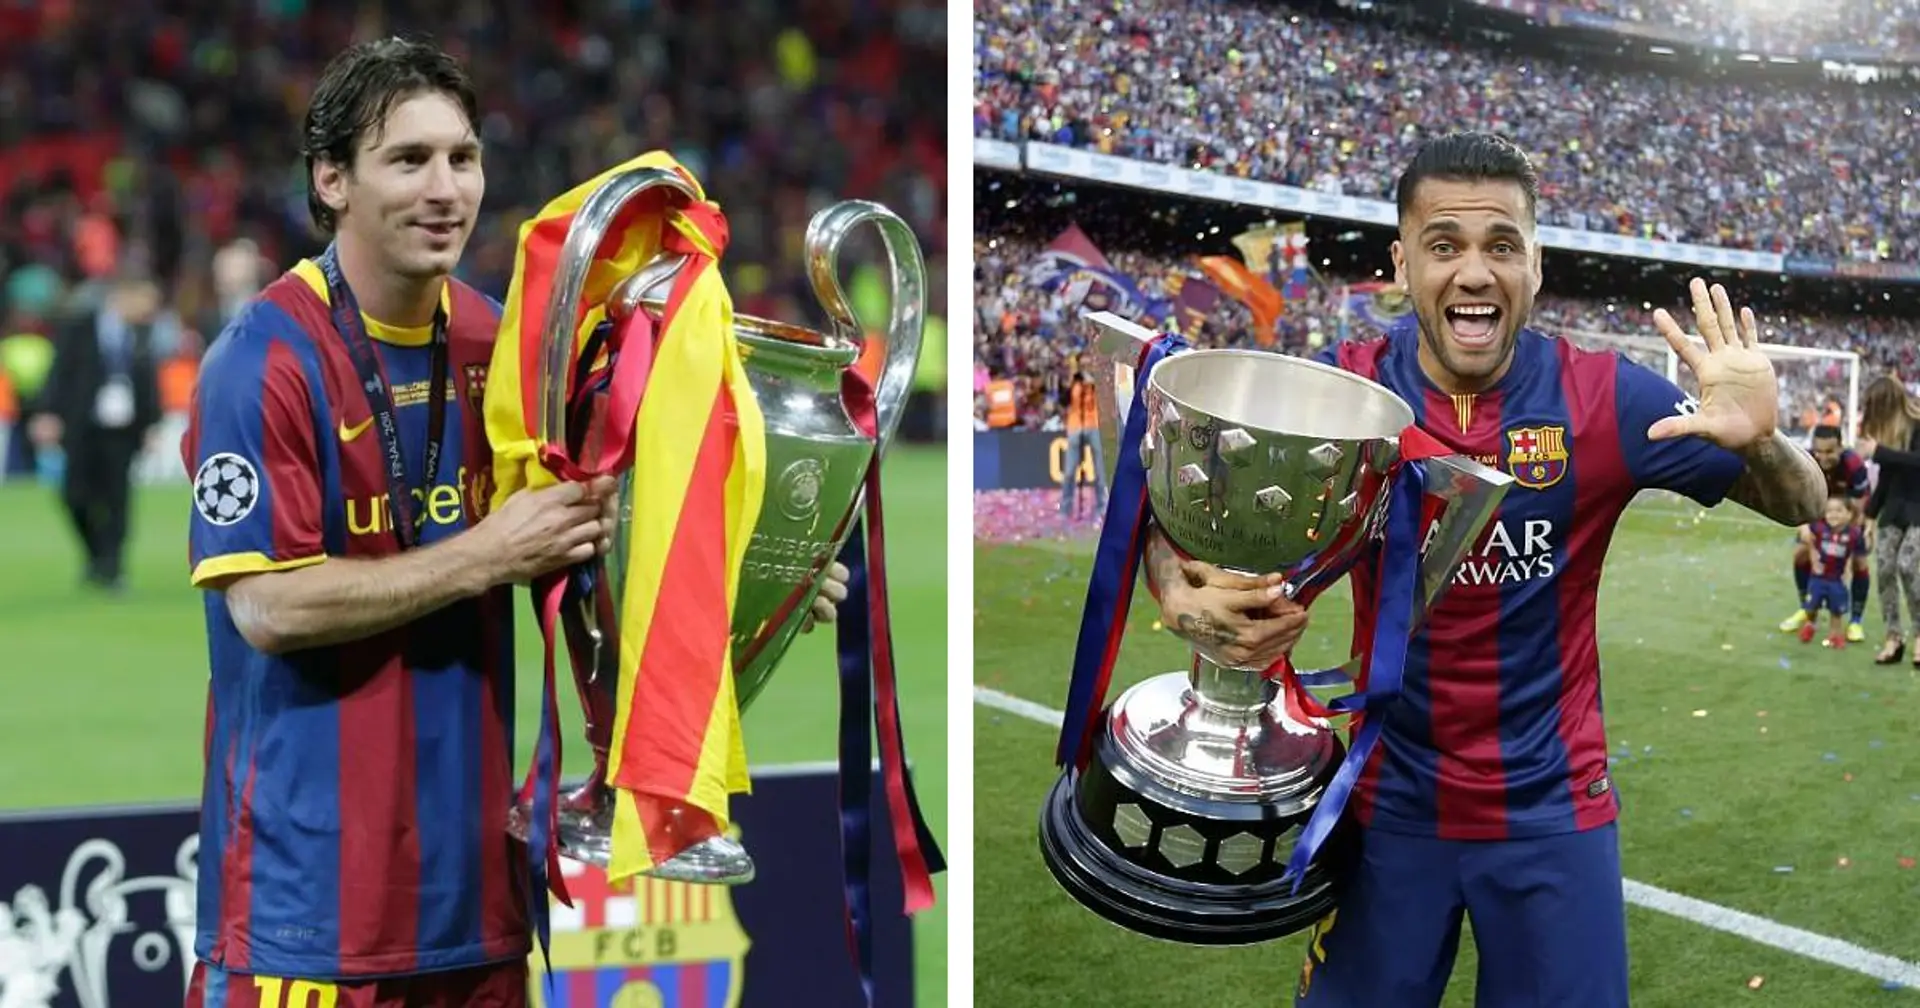 Leo Messi could become 2nd most-decorated footballer with Supercopa triumph; Dani Alves still ahead